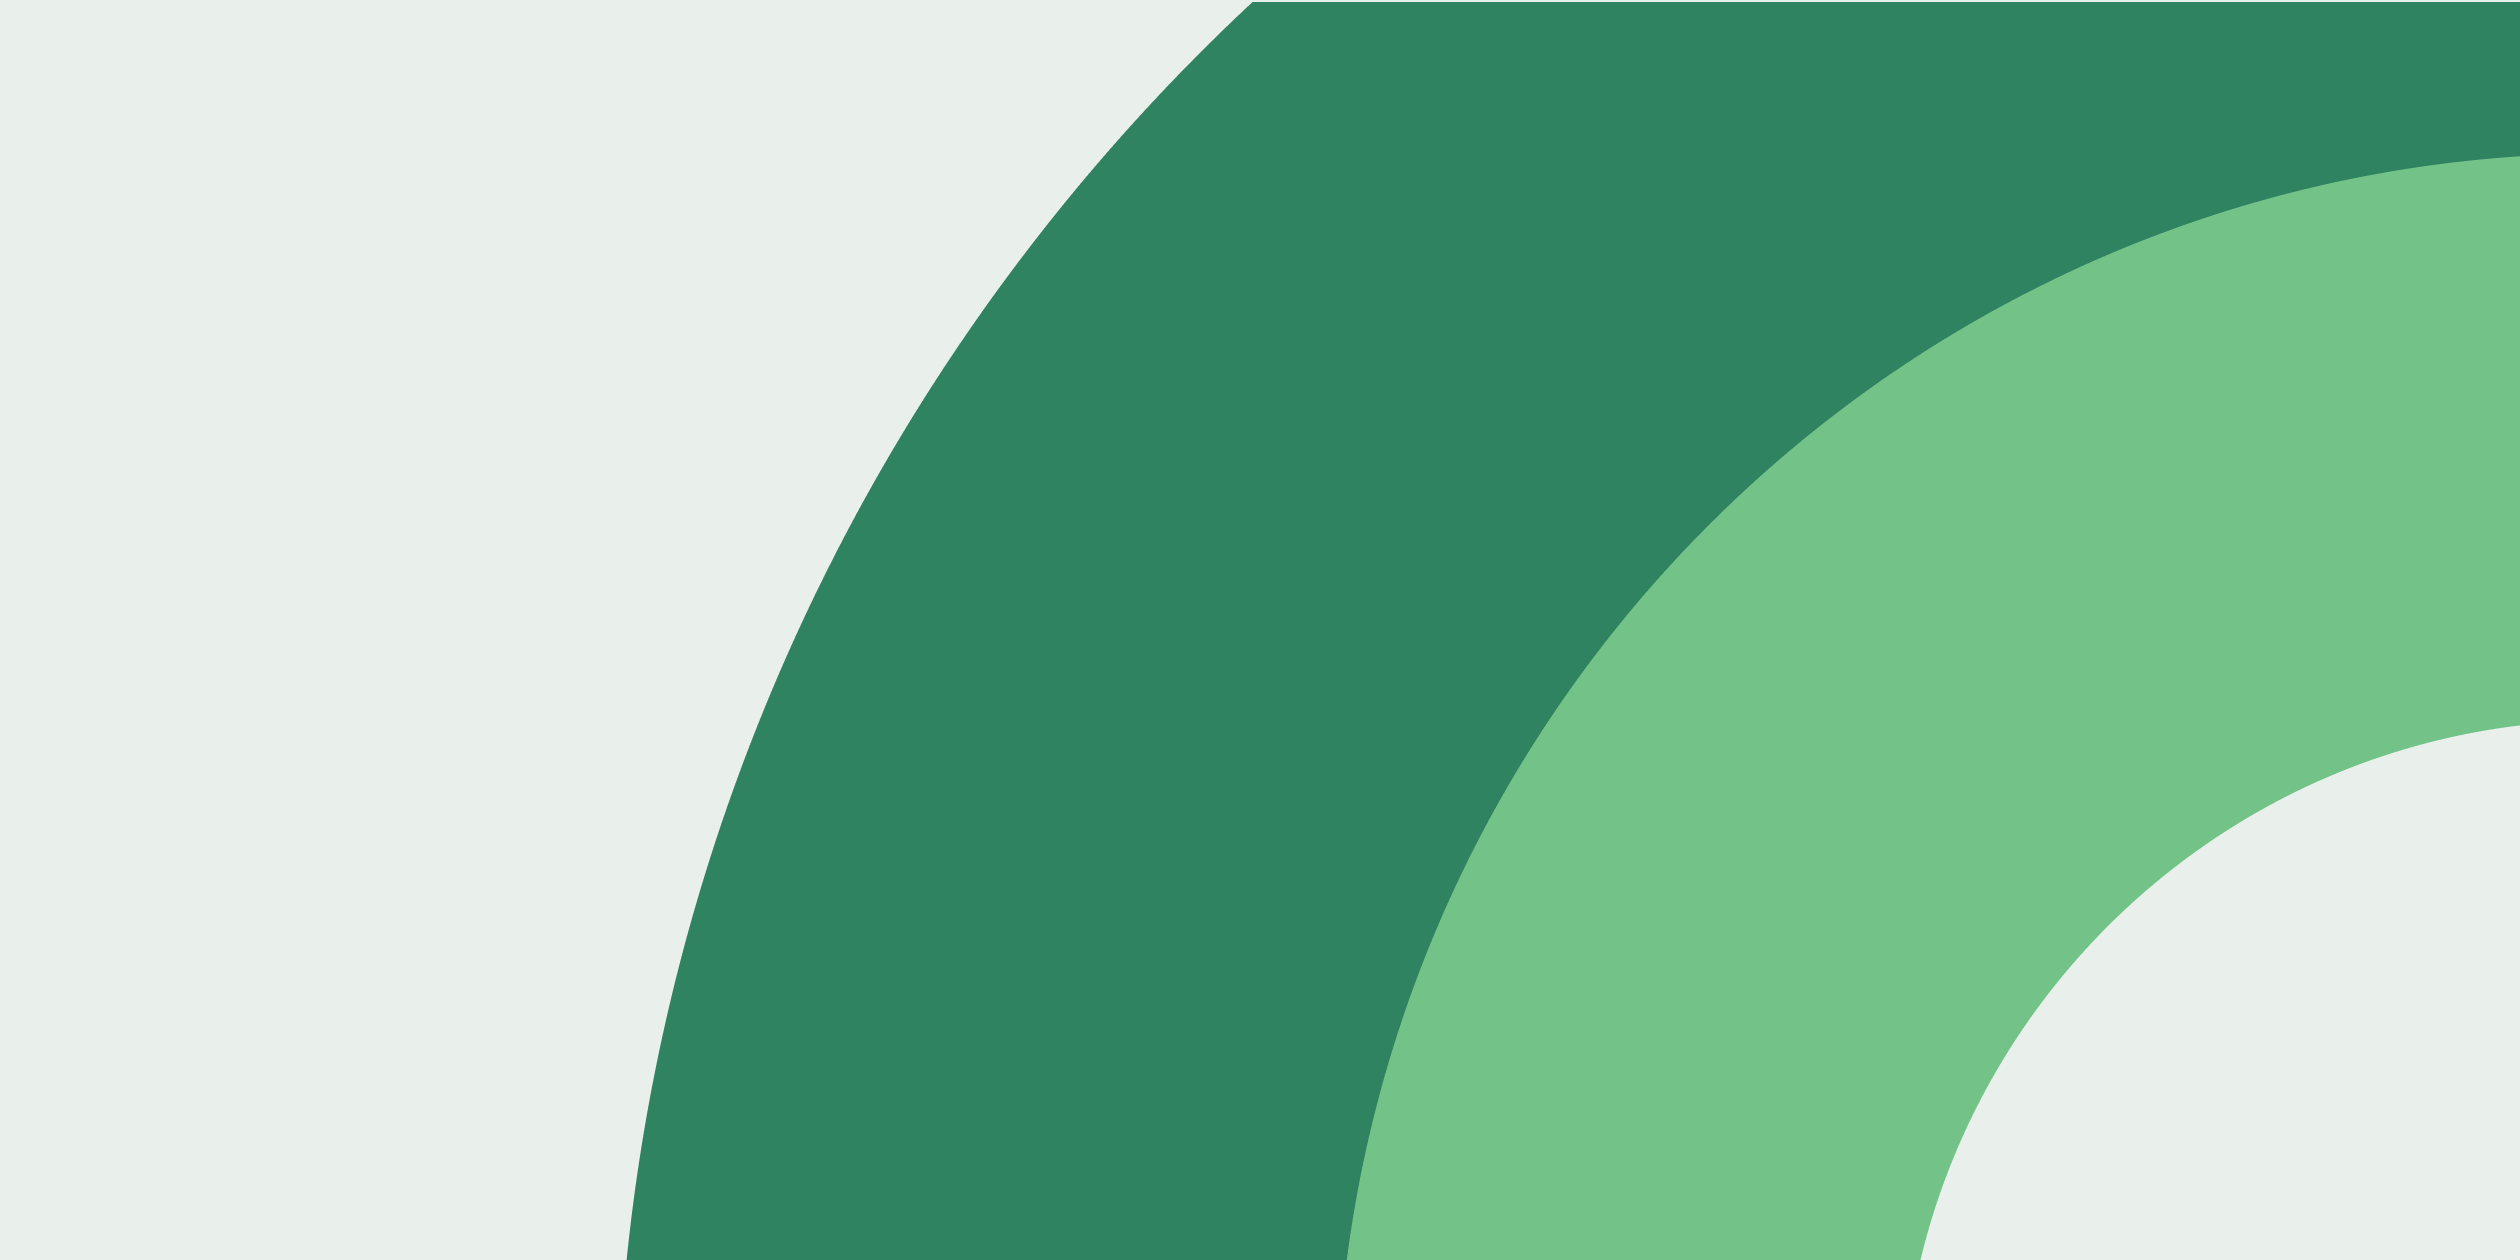 light green background with dark green and middle green arch stretching across